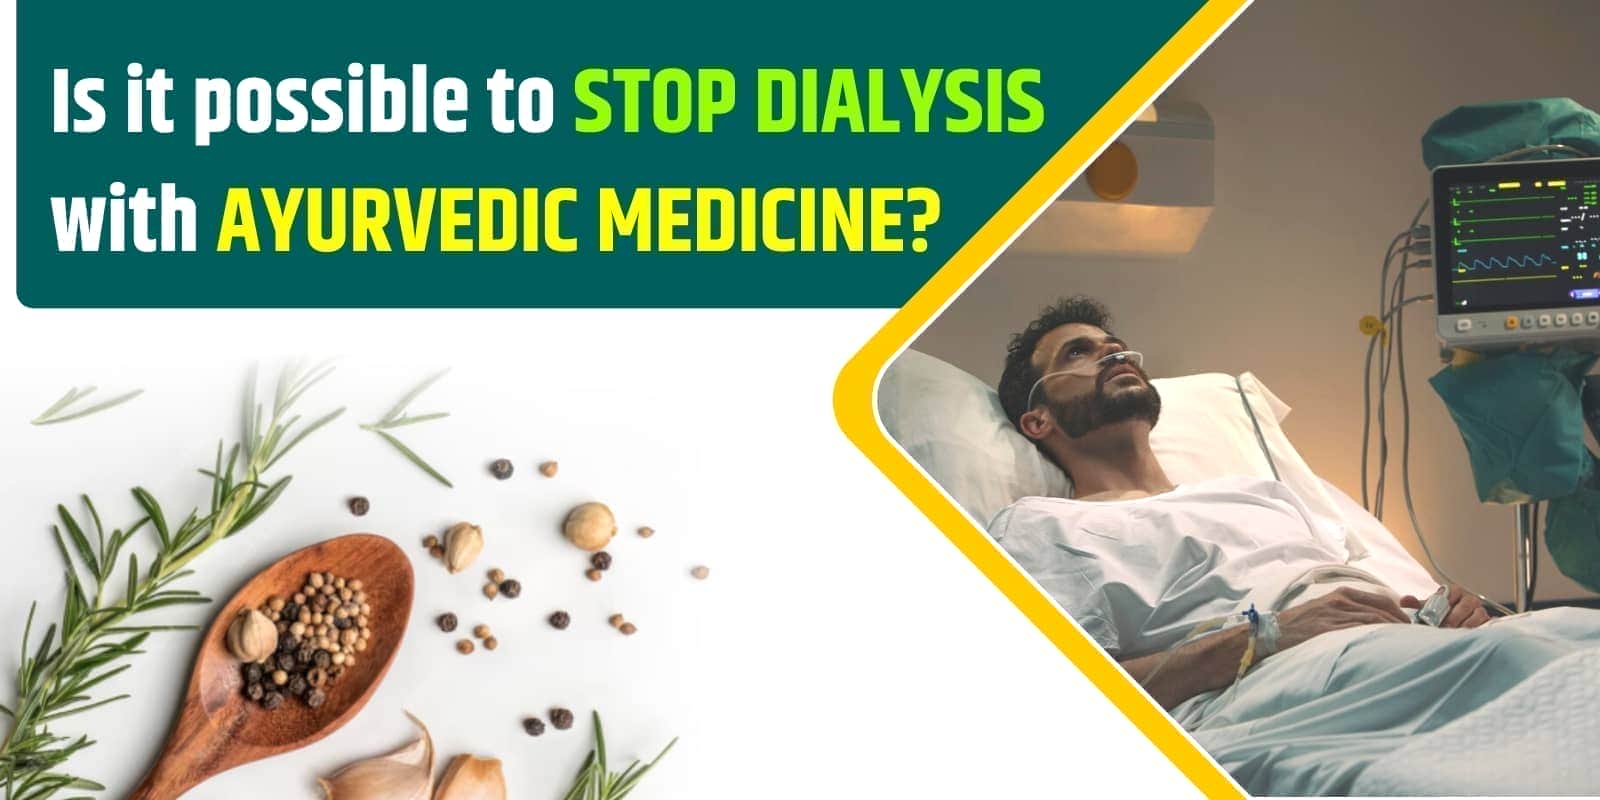 Is it possible to stop dialysis with Ayurvedic medicine?